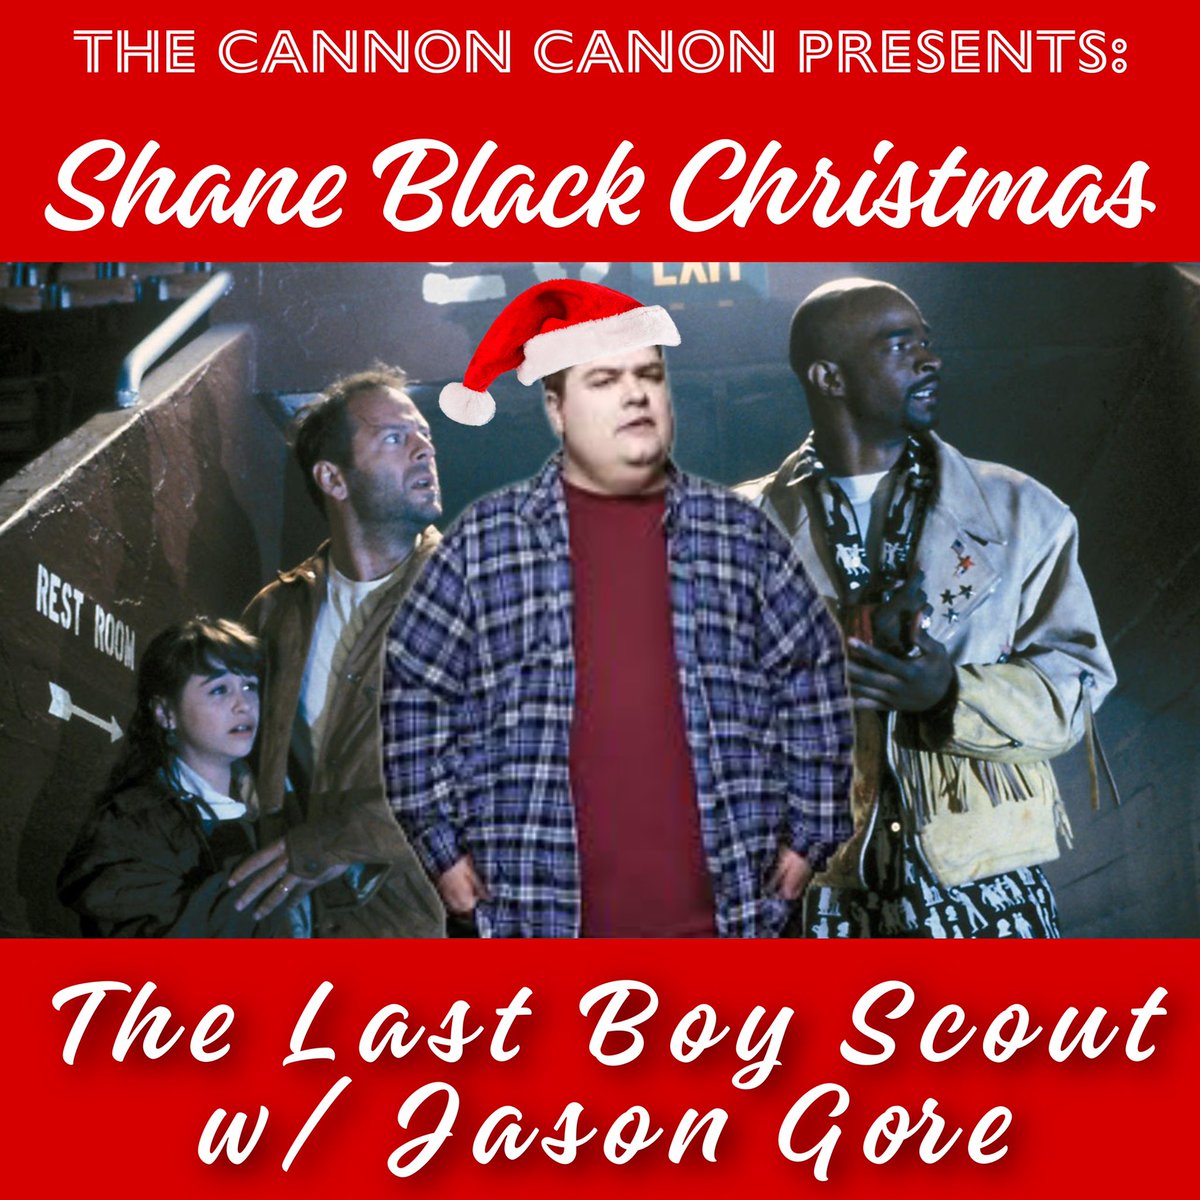 OUT NOW! 
Shane Black Christmas: THE LAST BOY SCOUT w @mrjasongore 

Friday night's a great night for football AND The Cannon Canon!

#thelastboyscout #tonyscott #brucewillis #damonwayans #chelseafield #taylornegron #danielleharris #halleberry #shaneblackchristmas #thecannoncanon